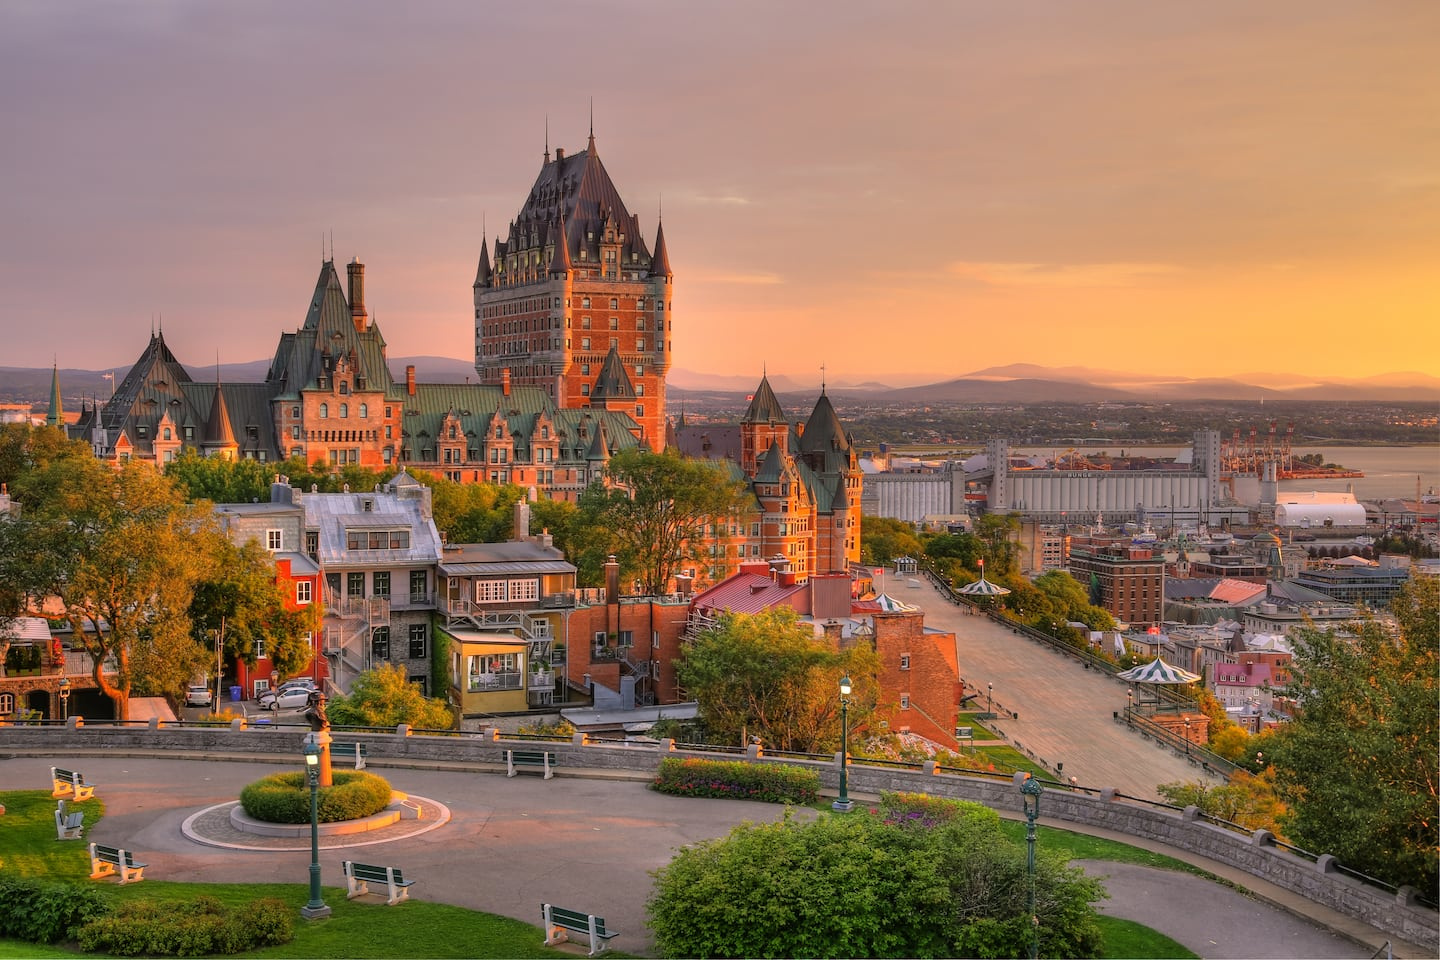 Quebec retains its title of best city in Canada, according to Travel Leisure